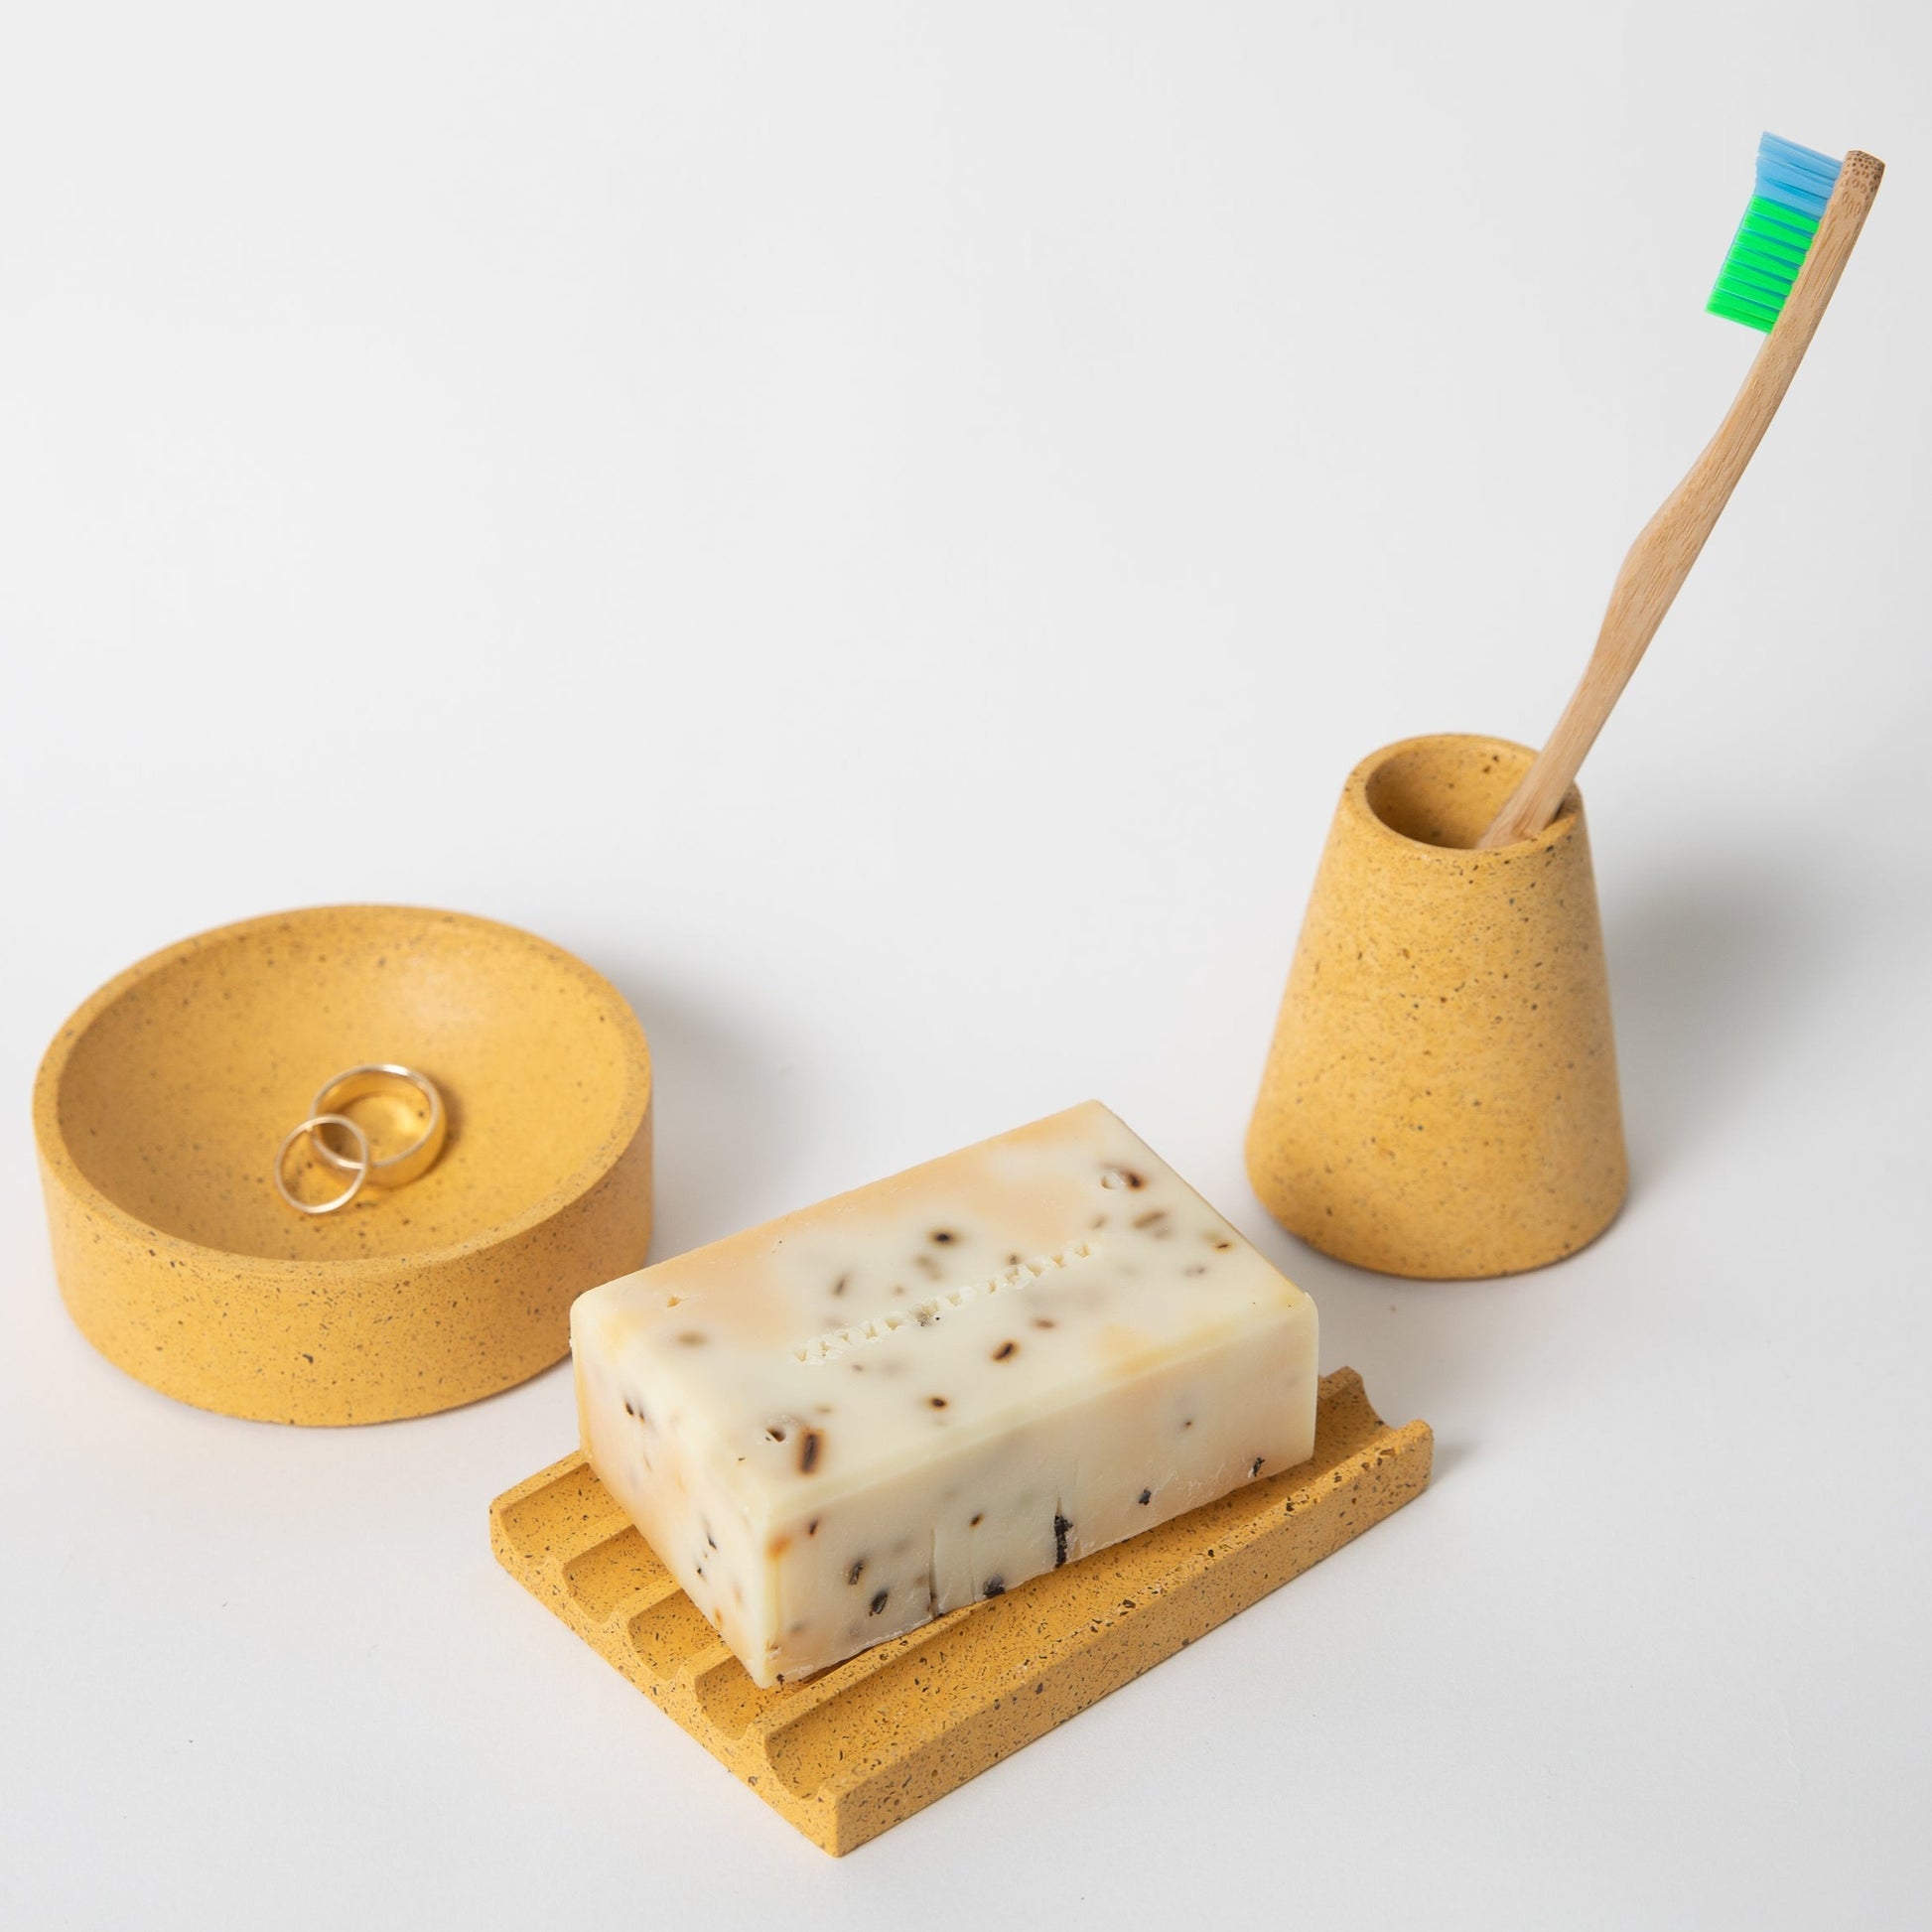 Soap dish, toothbrush holder, and a 4" catch all in marigold terrazzo.